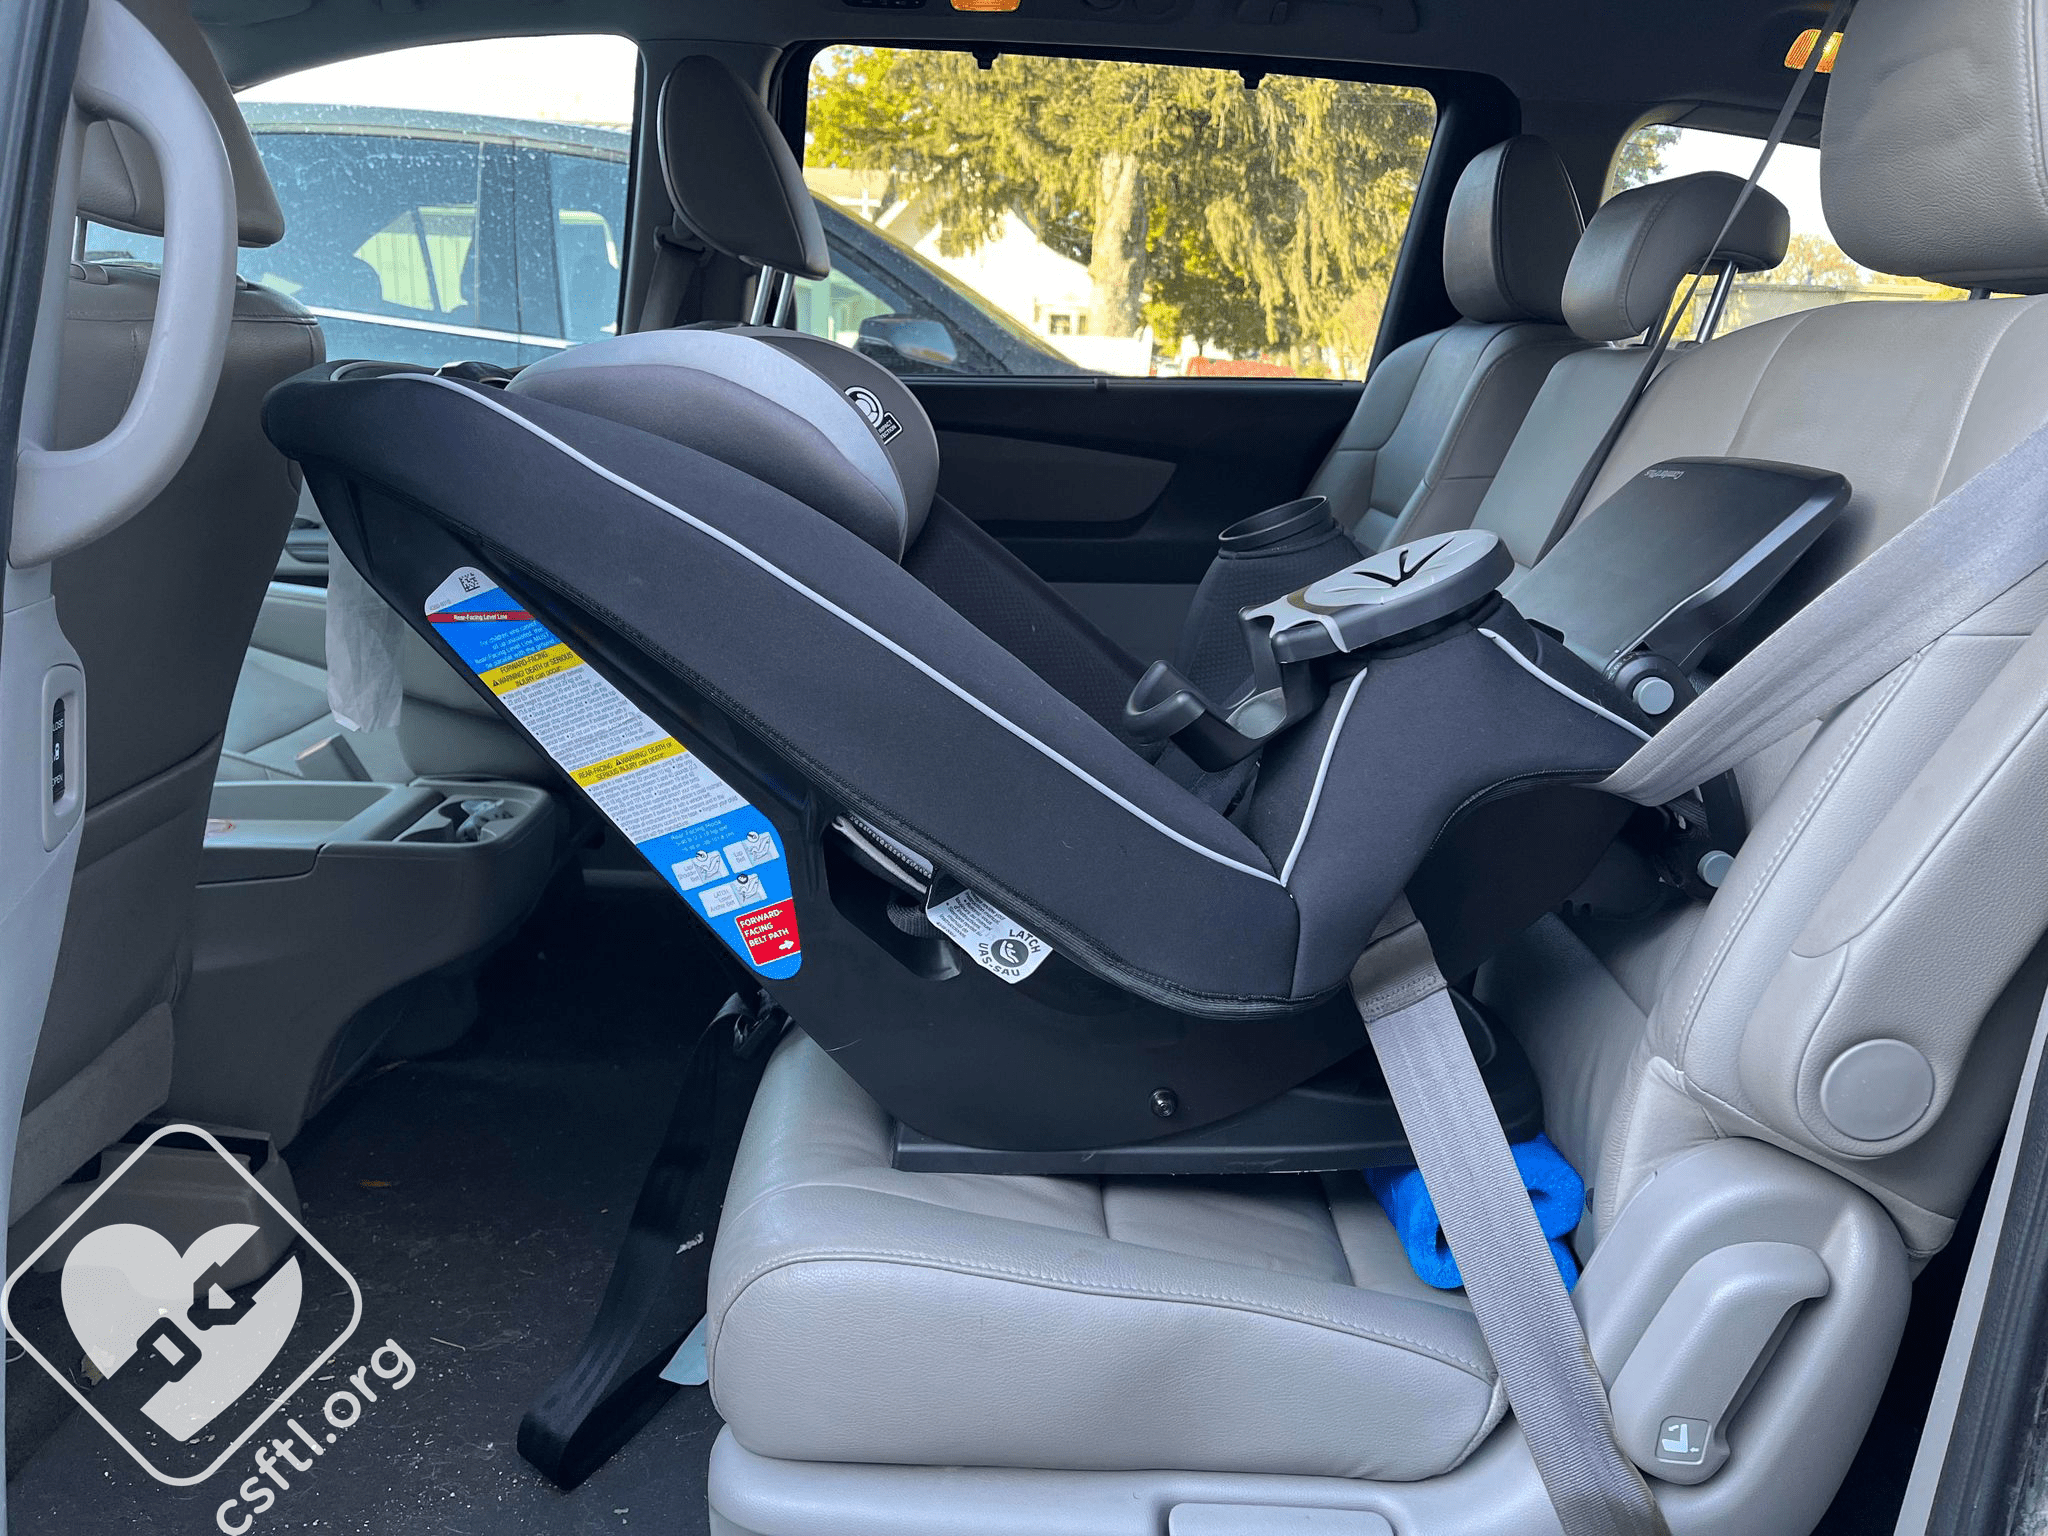 How to Install Safety First Car Seat: Quick & Easy Guide